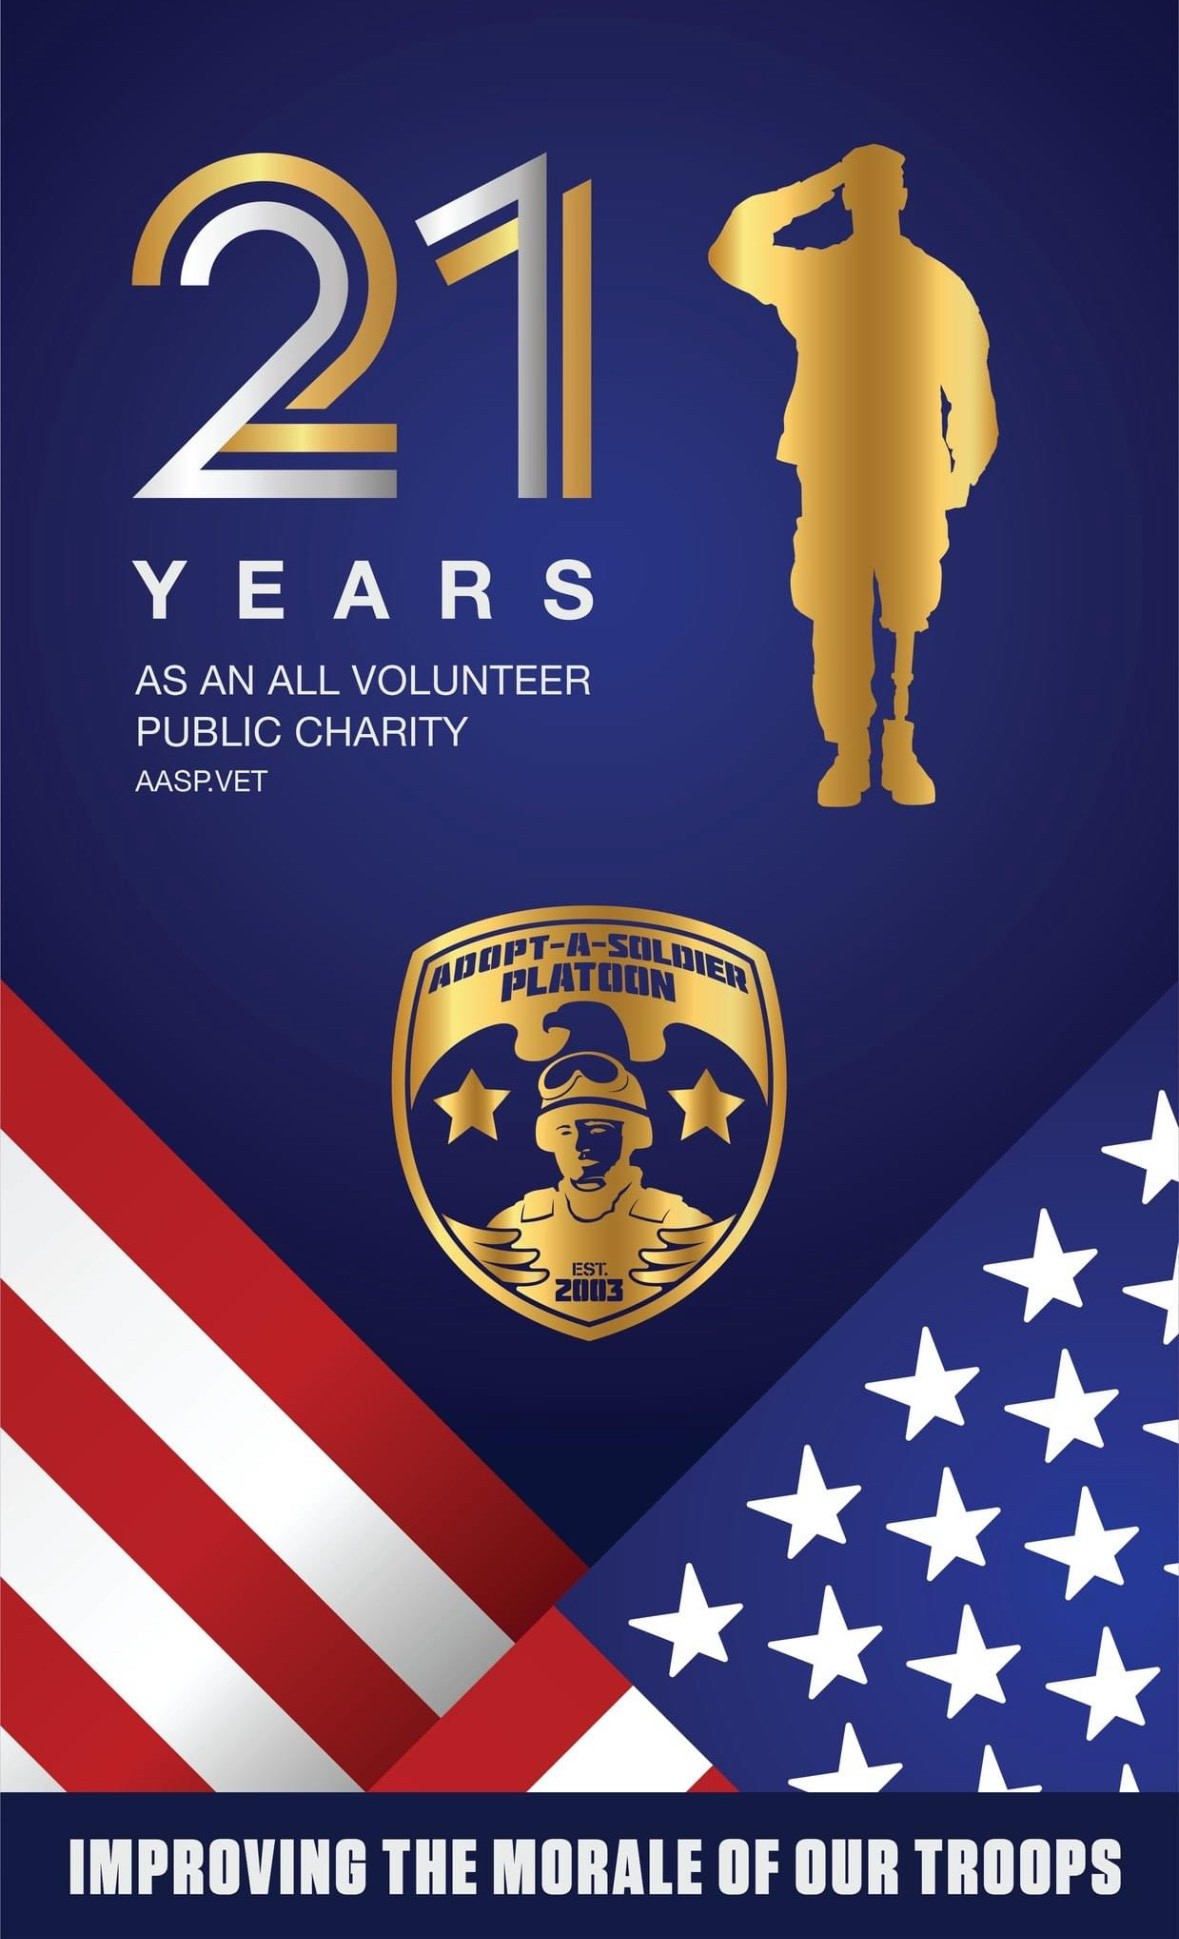 Celebrating 21 Years of Adopt-A-Soldier Platoon 0424